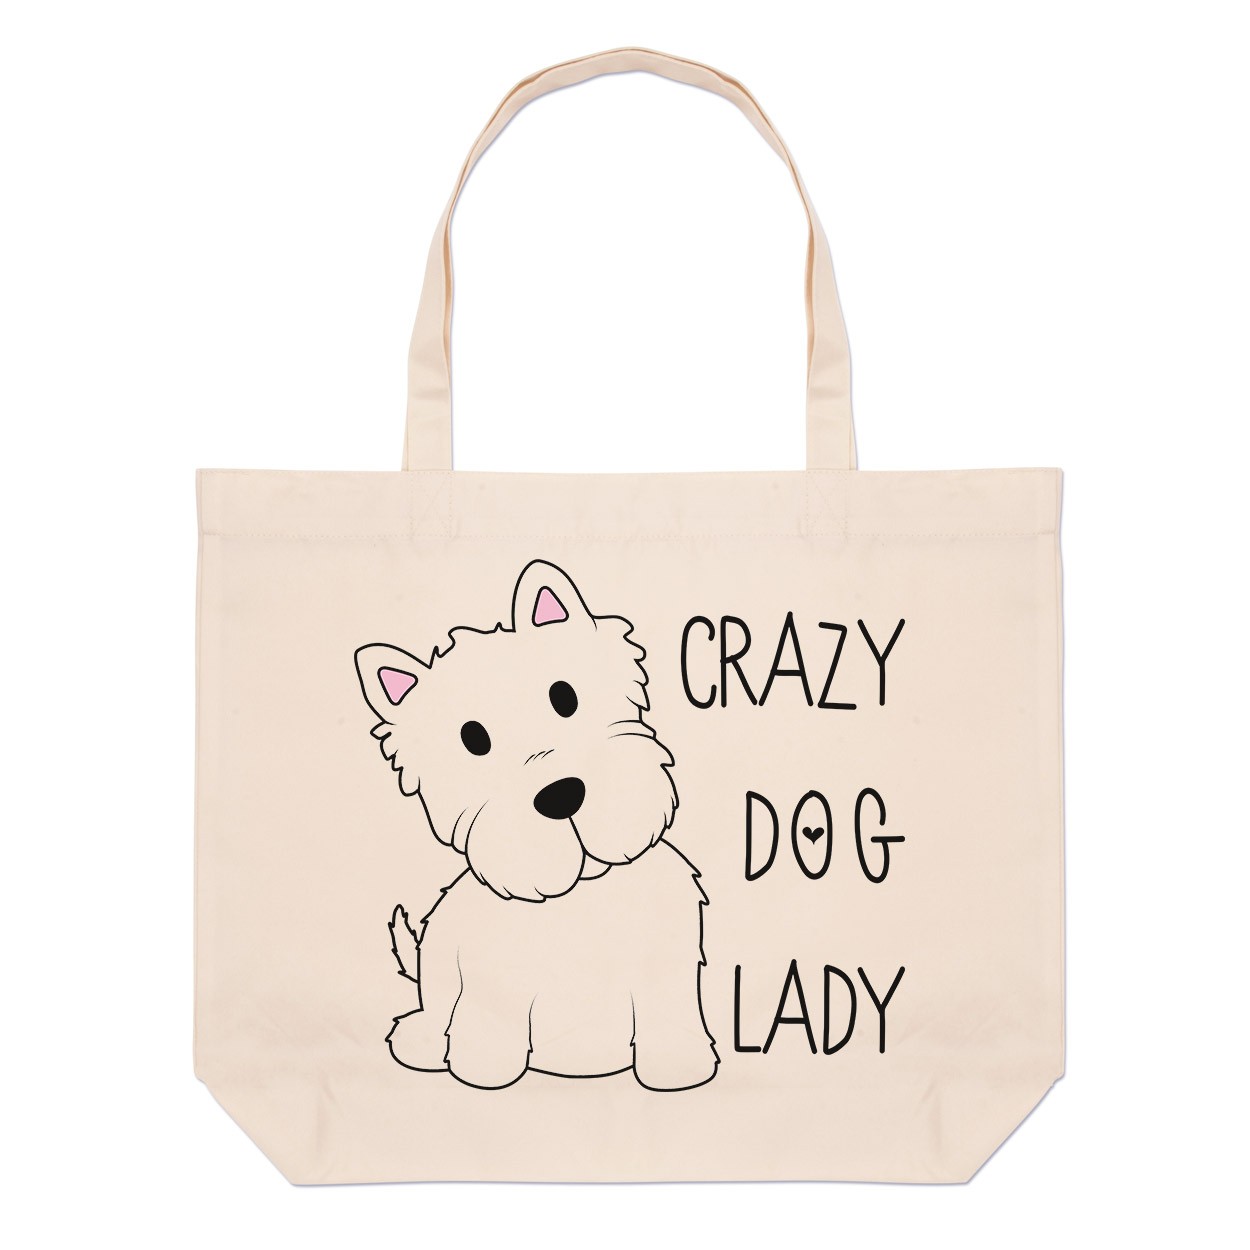 Crazy Dog Lady Large Beach Tote Bag